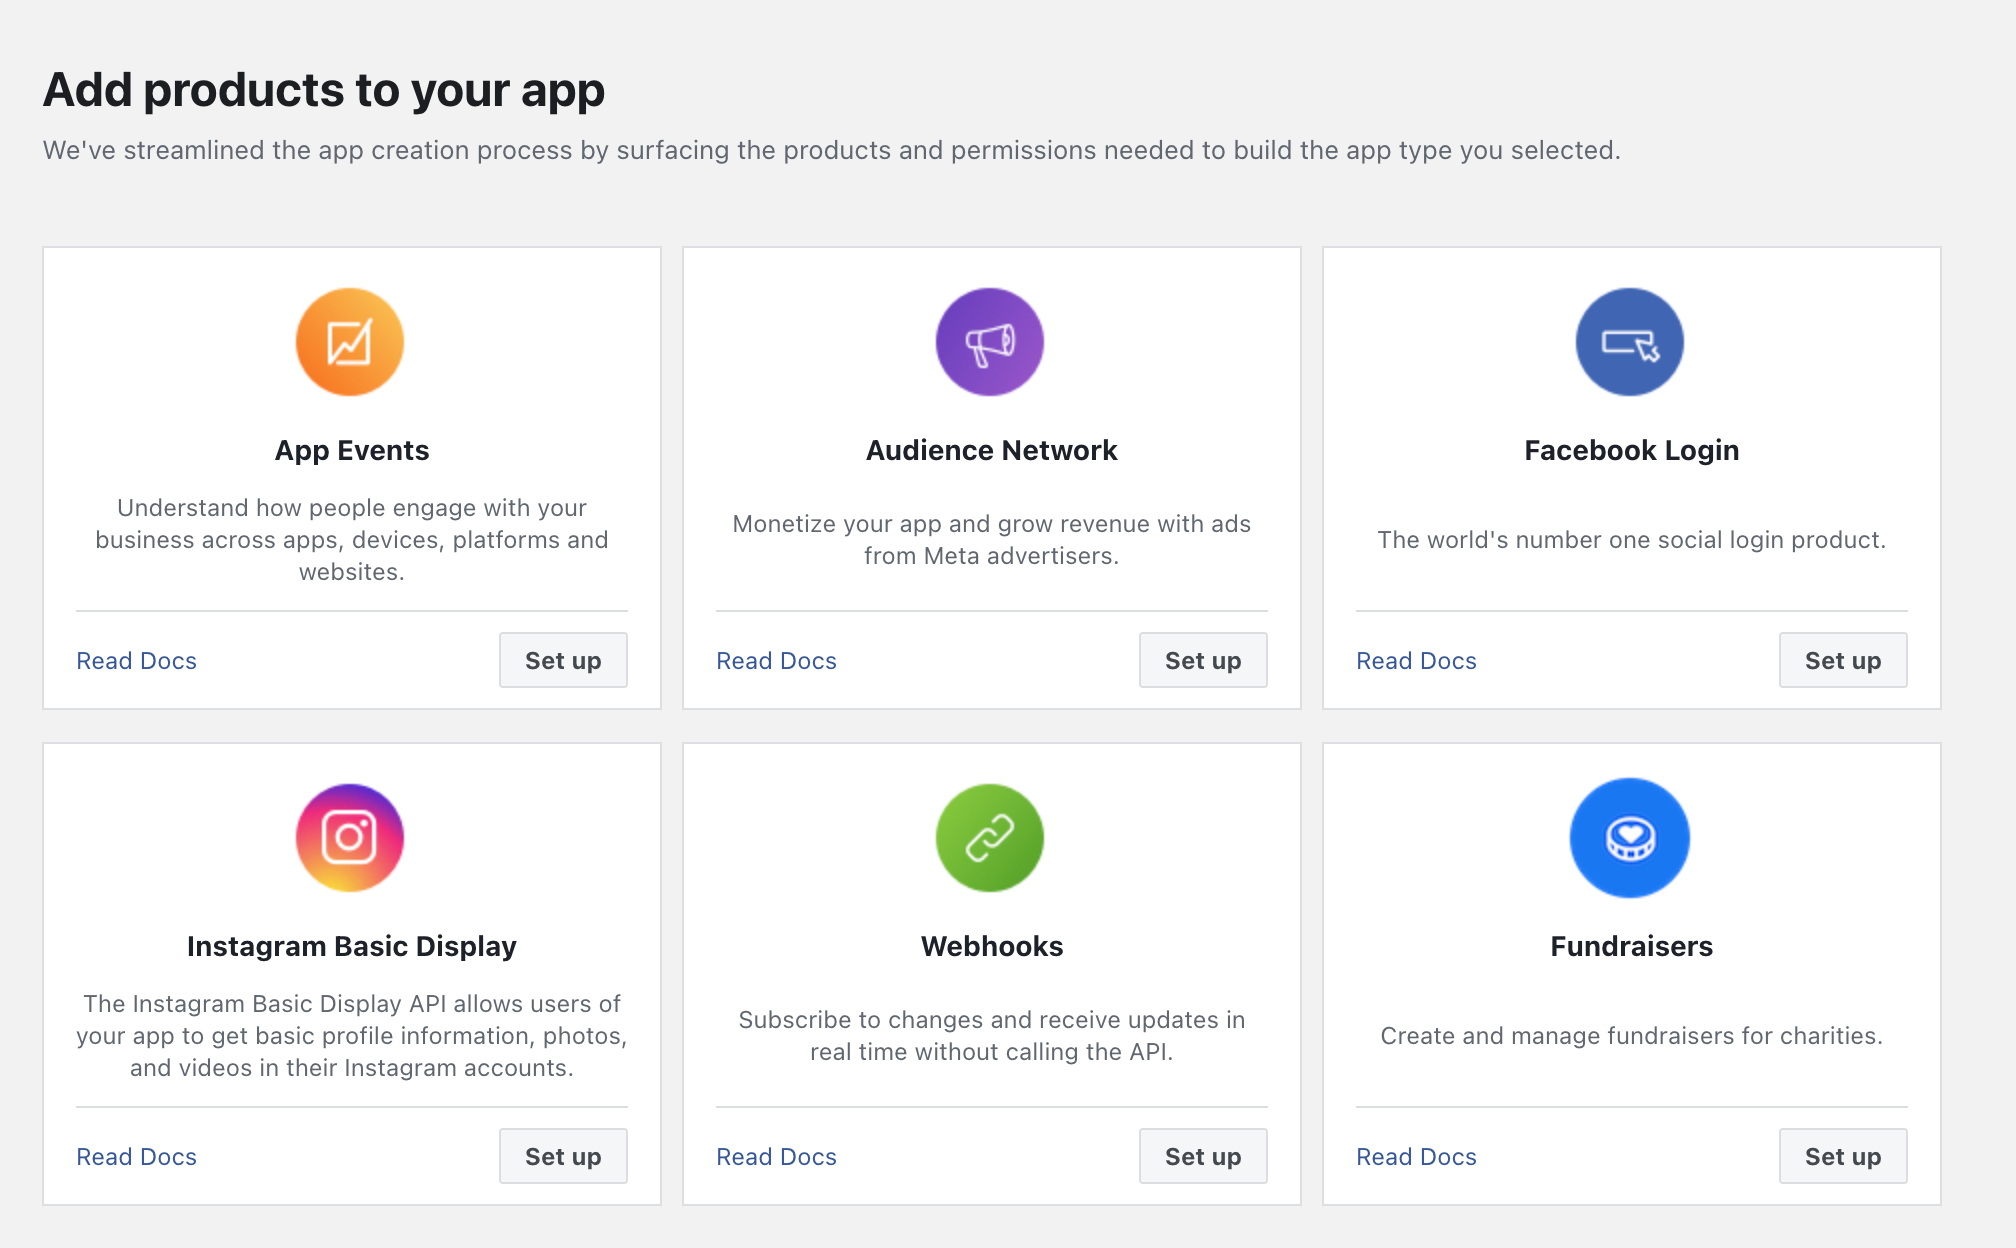 Add products to your facebook app